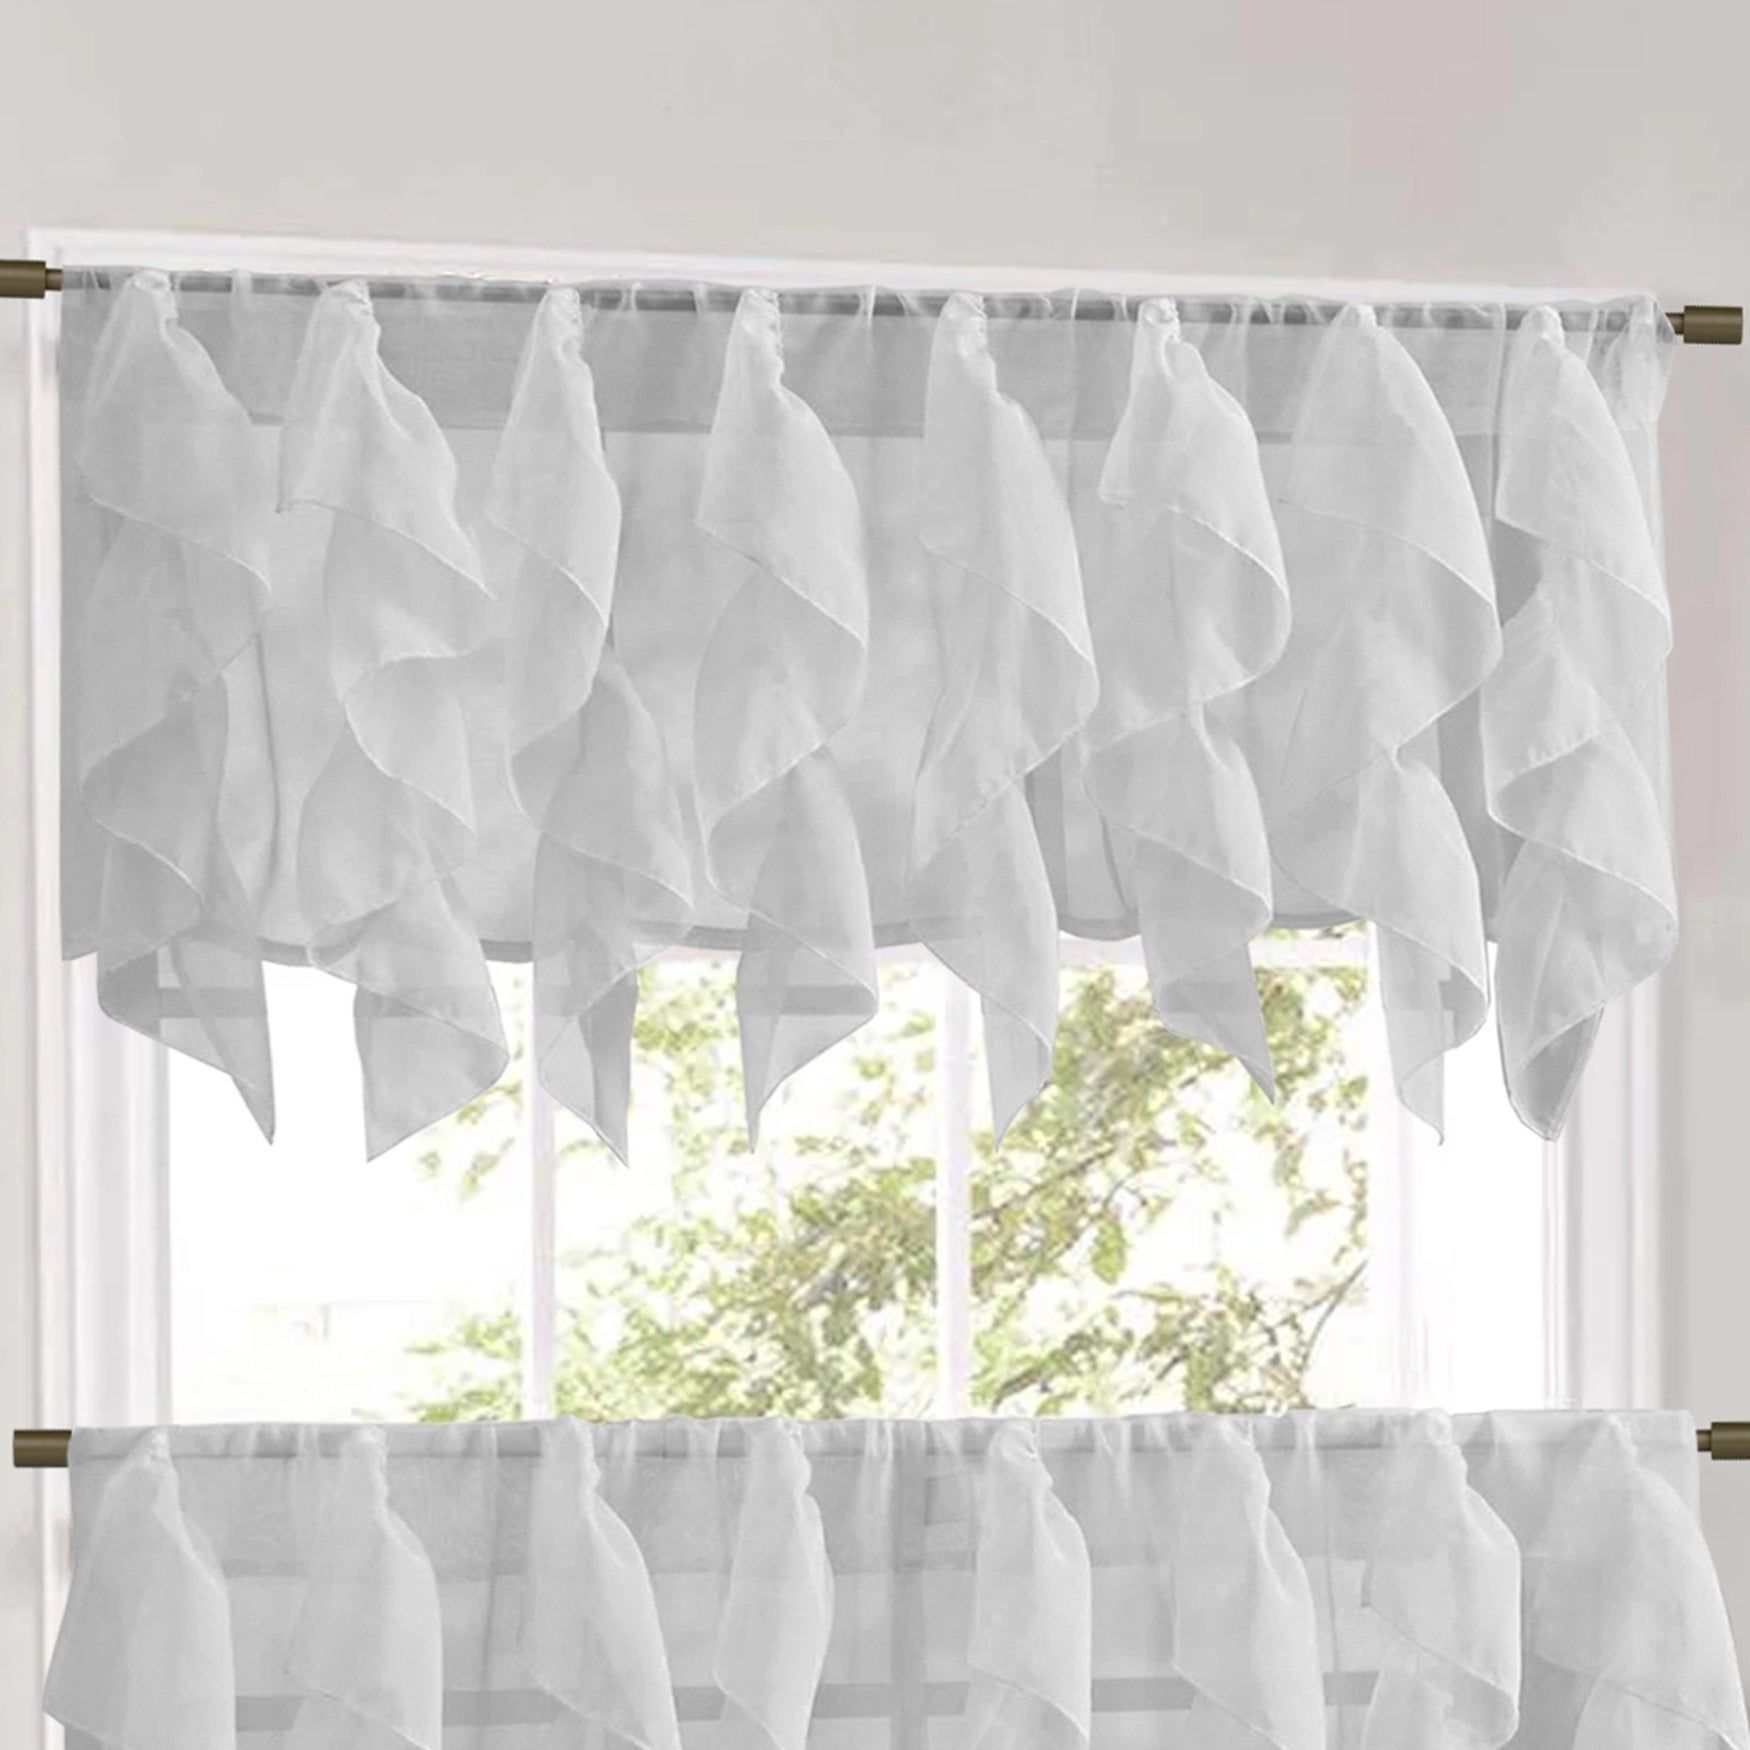 Sweet Home Collection Silver Vertical Ruffled Waterfall Valance And Curtain  Tiers Regarding Navy Vertical Ruffled Waterfall Valance And Curtain Tiers (View 7 of 20)